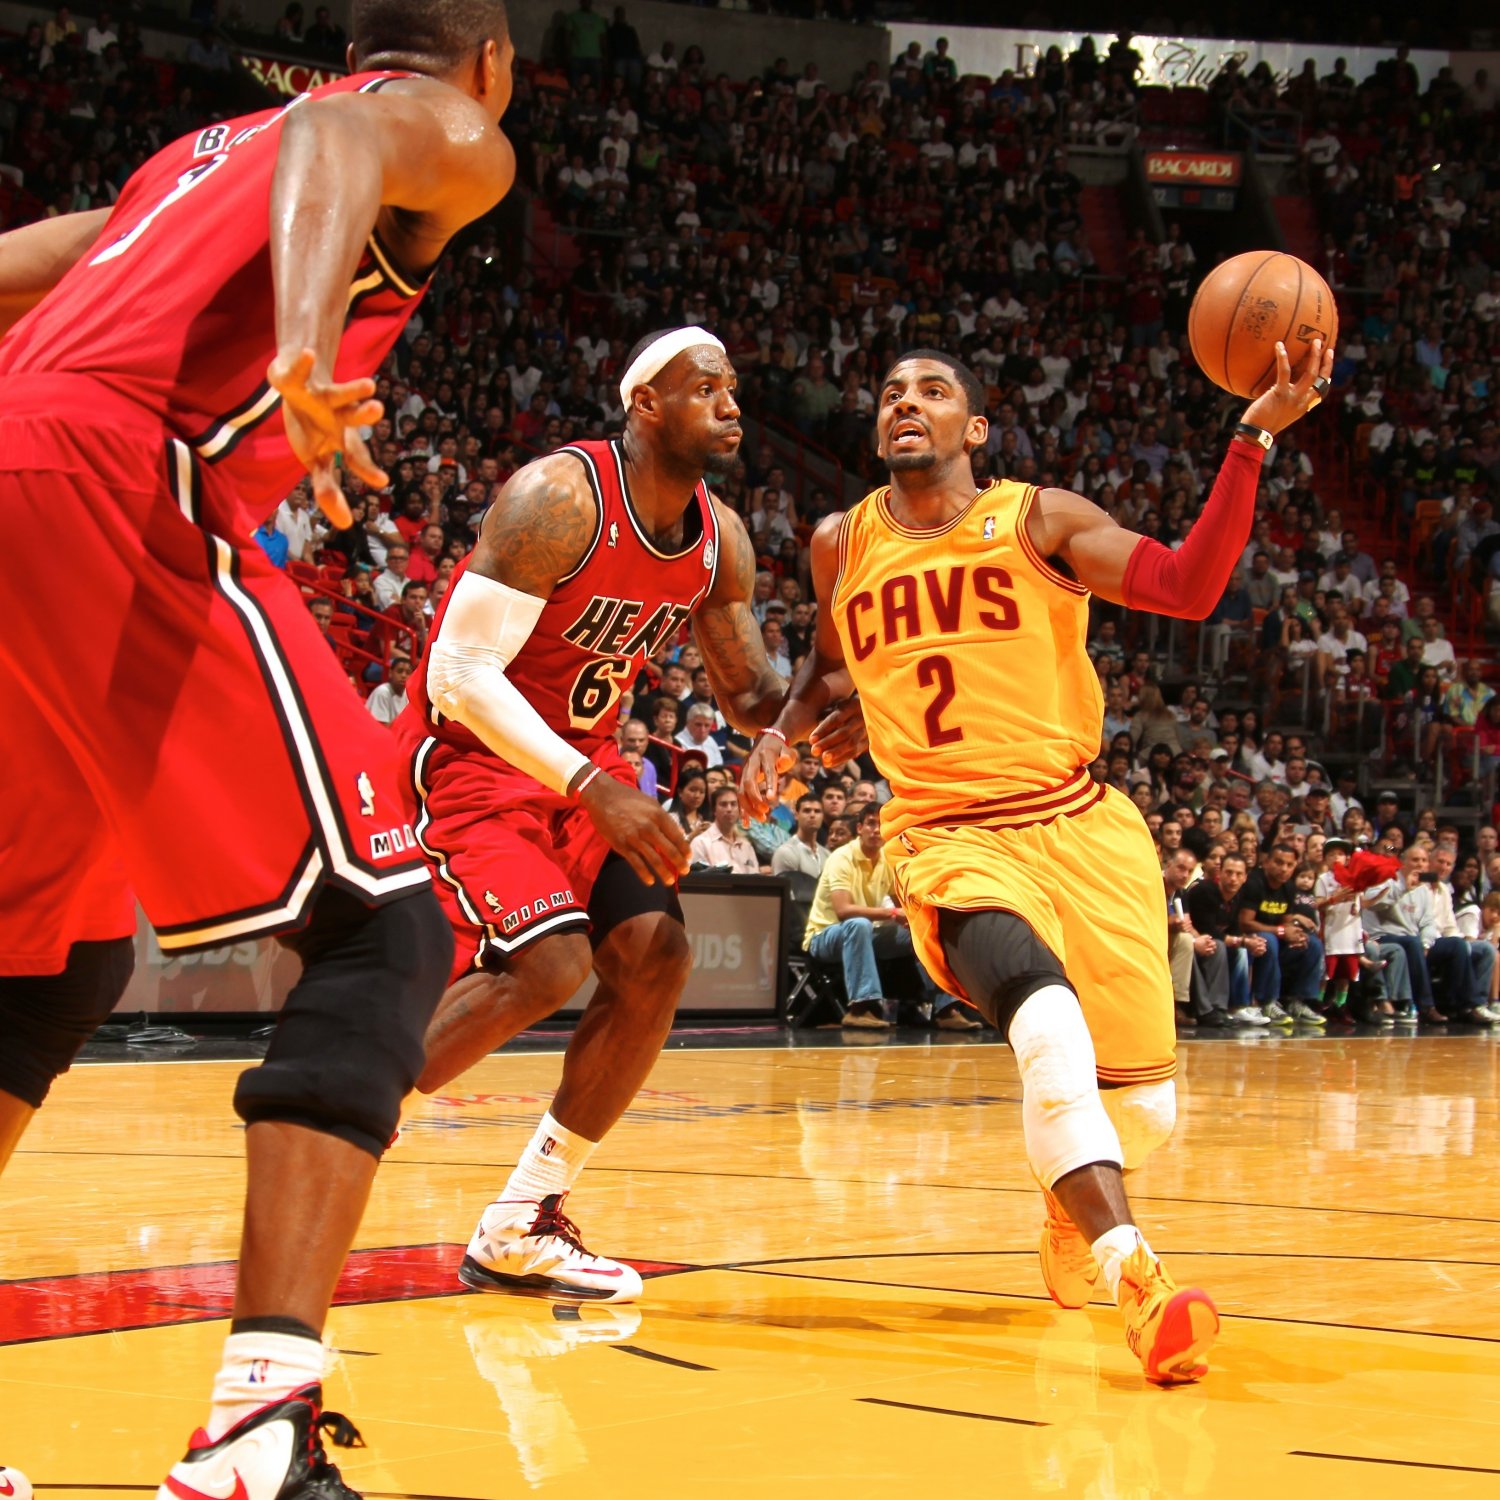 Complete Guide to Cavs vs. Heat and Saturday's NBA Action | Bleacher Report